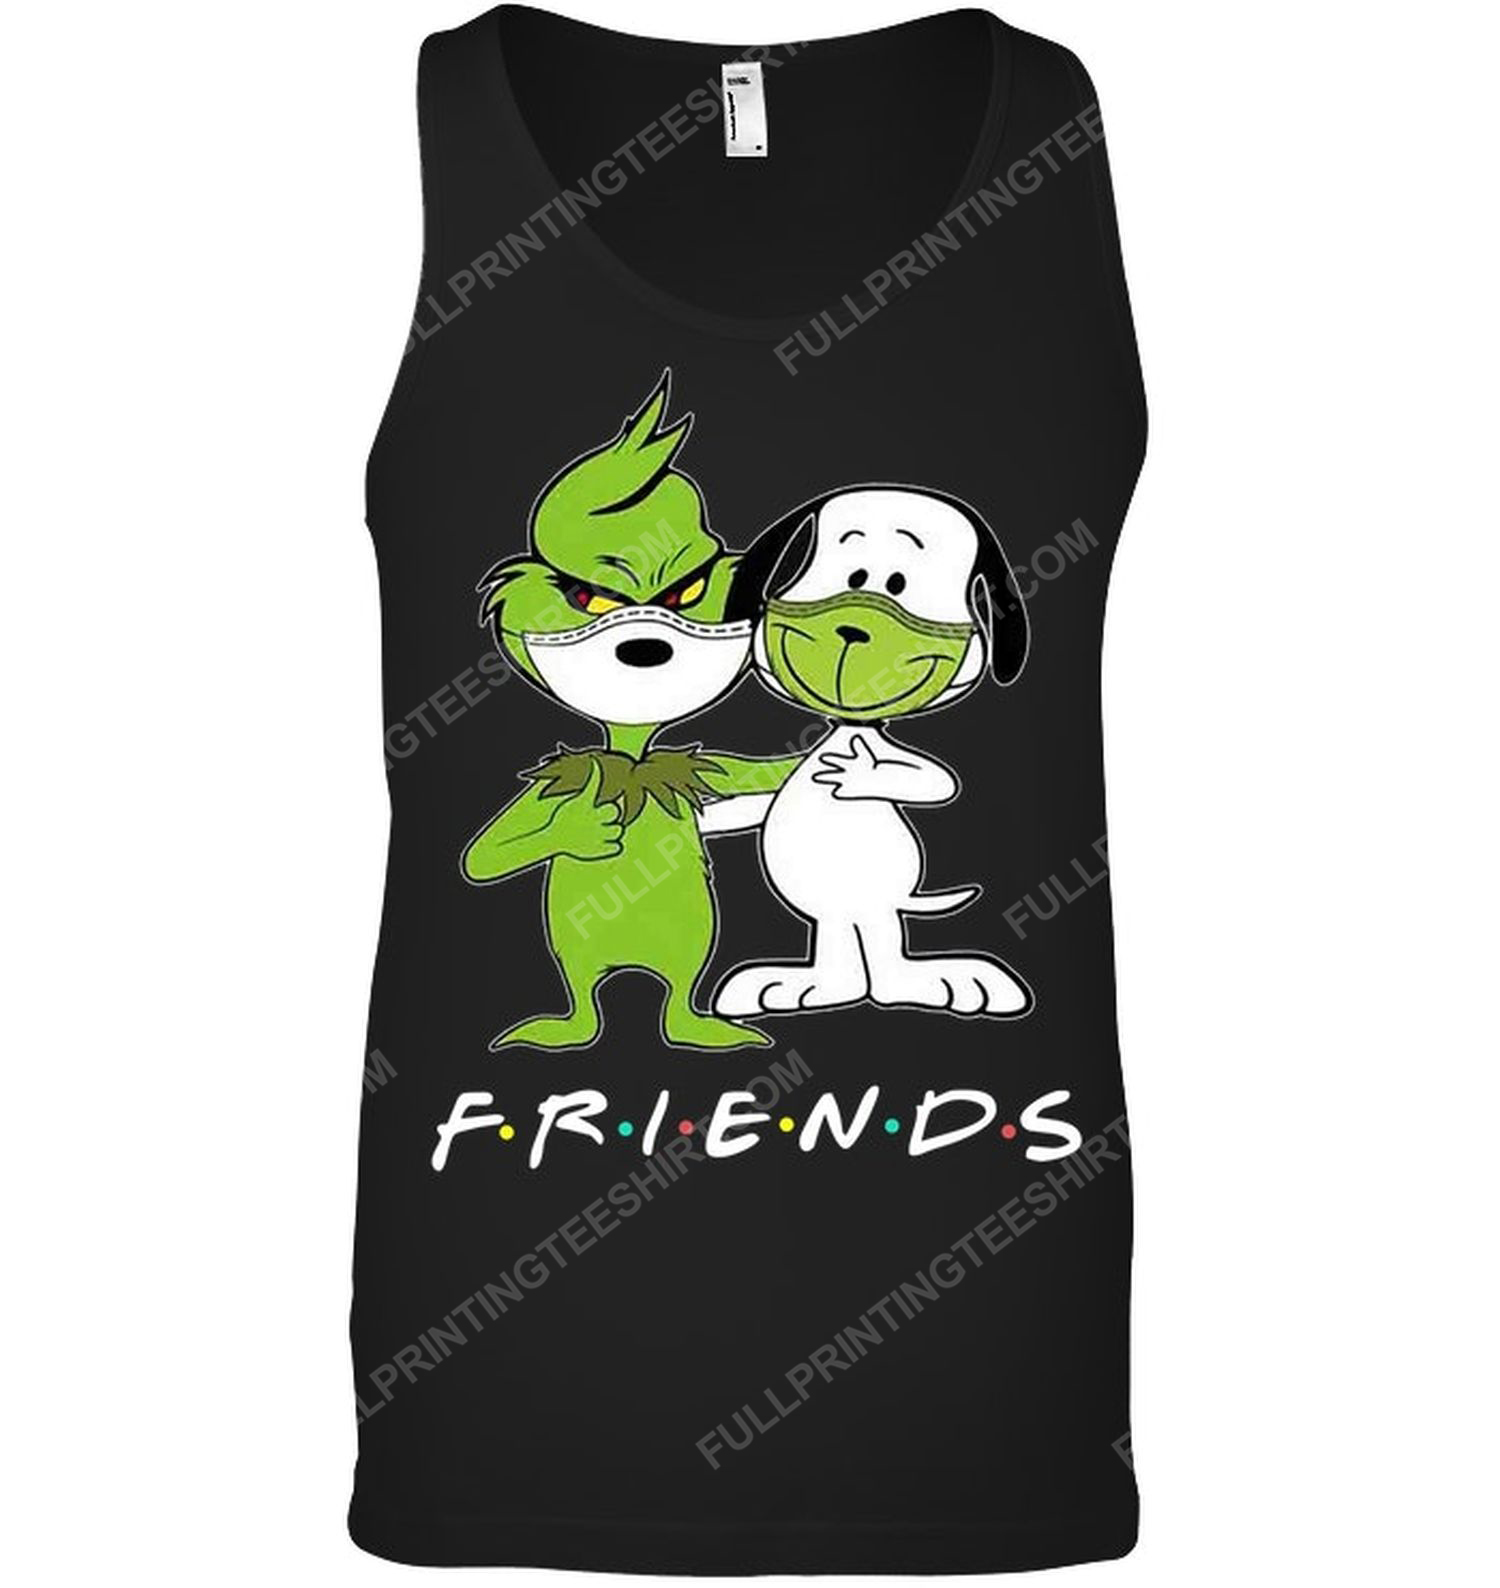 The grinch and snoopy friends tv show tank top